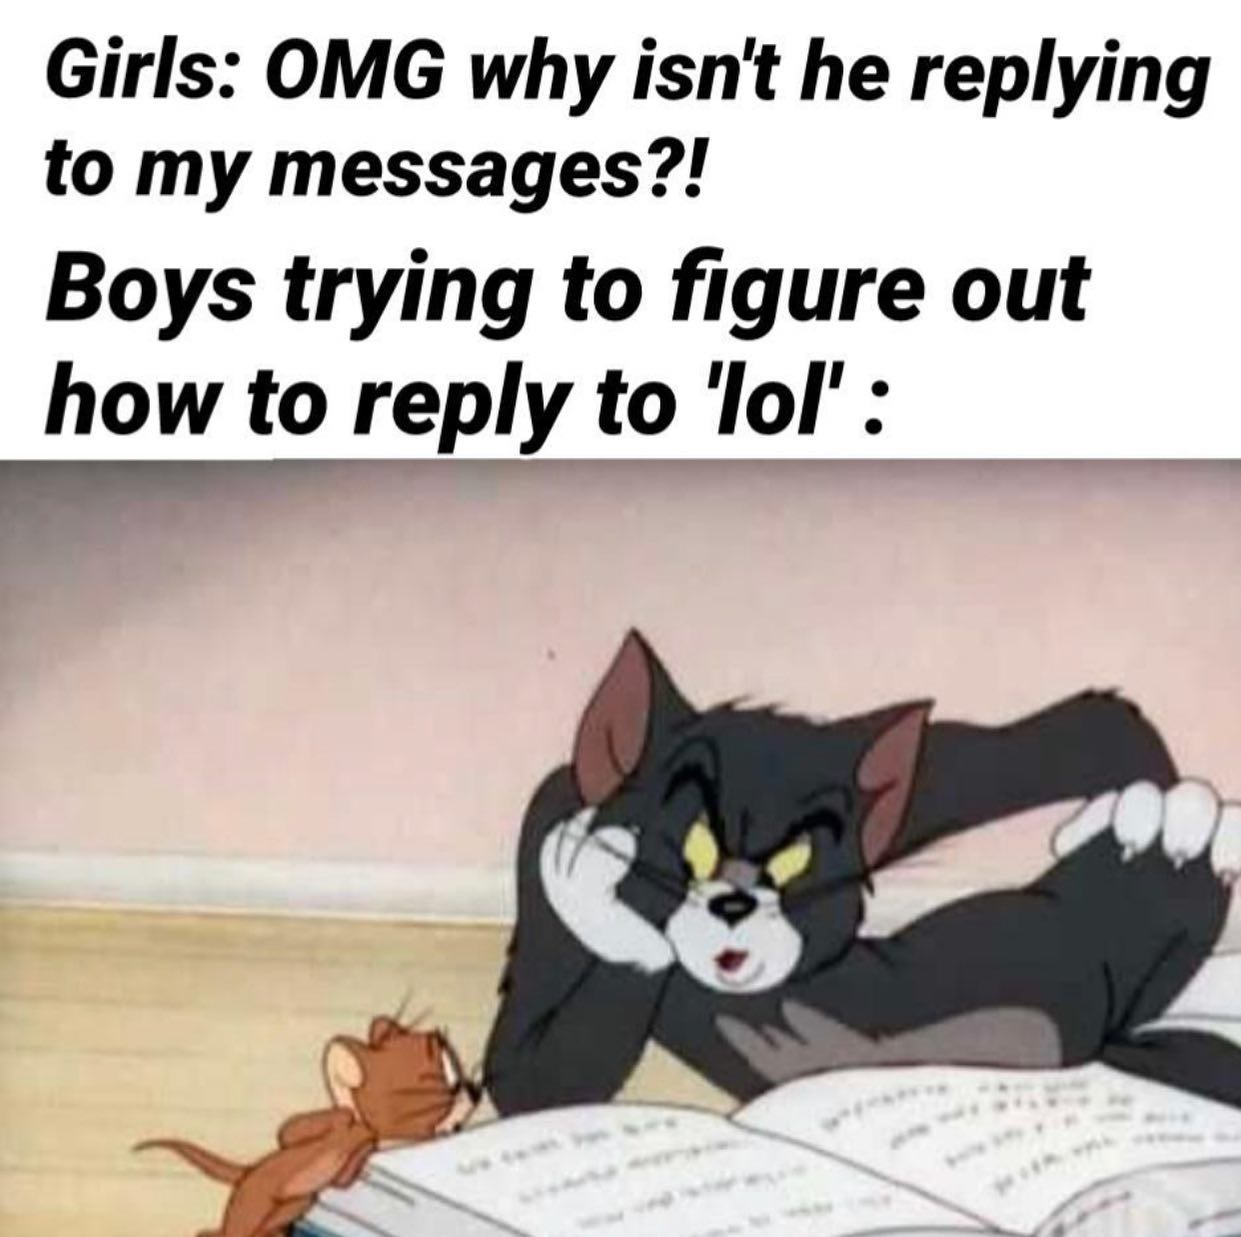 dank memes - tom & jerry deluxe anniversary collection - Girls Omg why isn't he my messages?! Boys trying to figure out how to to 'lol